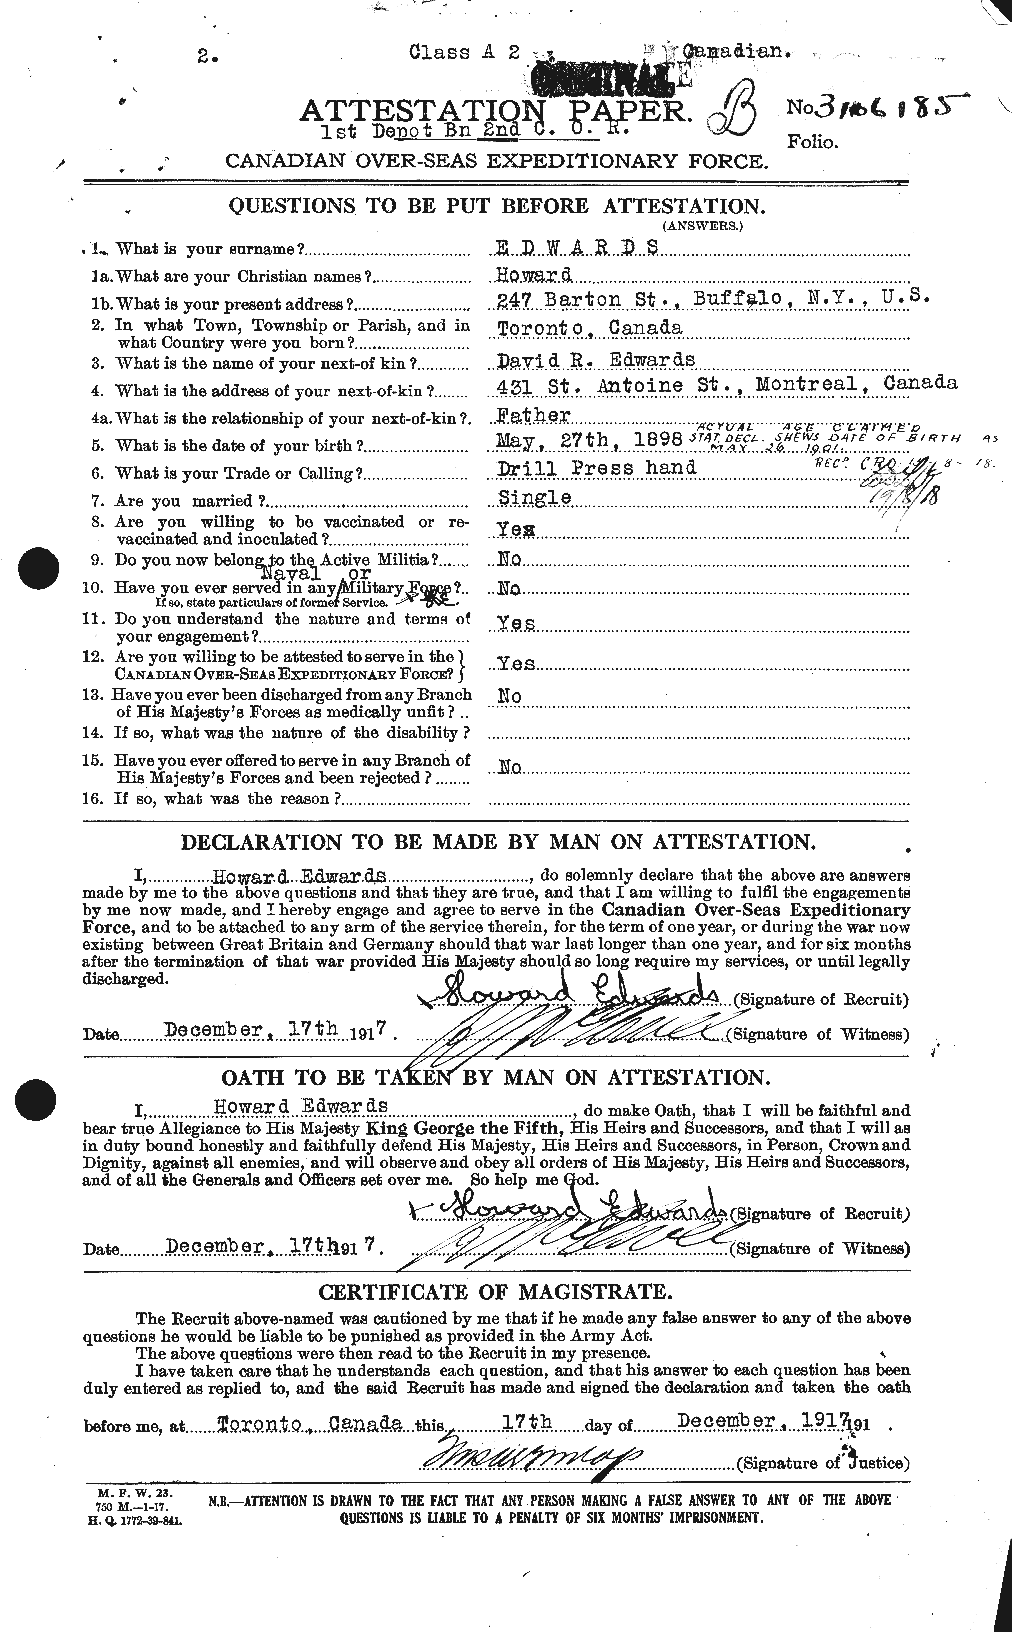 Personnel Records of the First World War - CEF 309787a